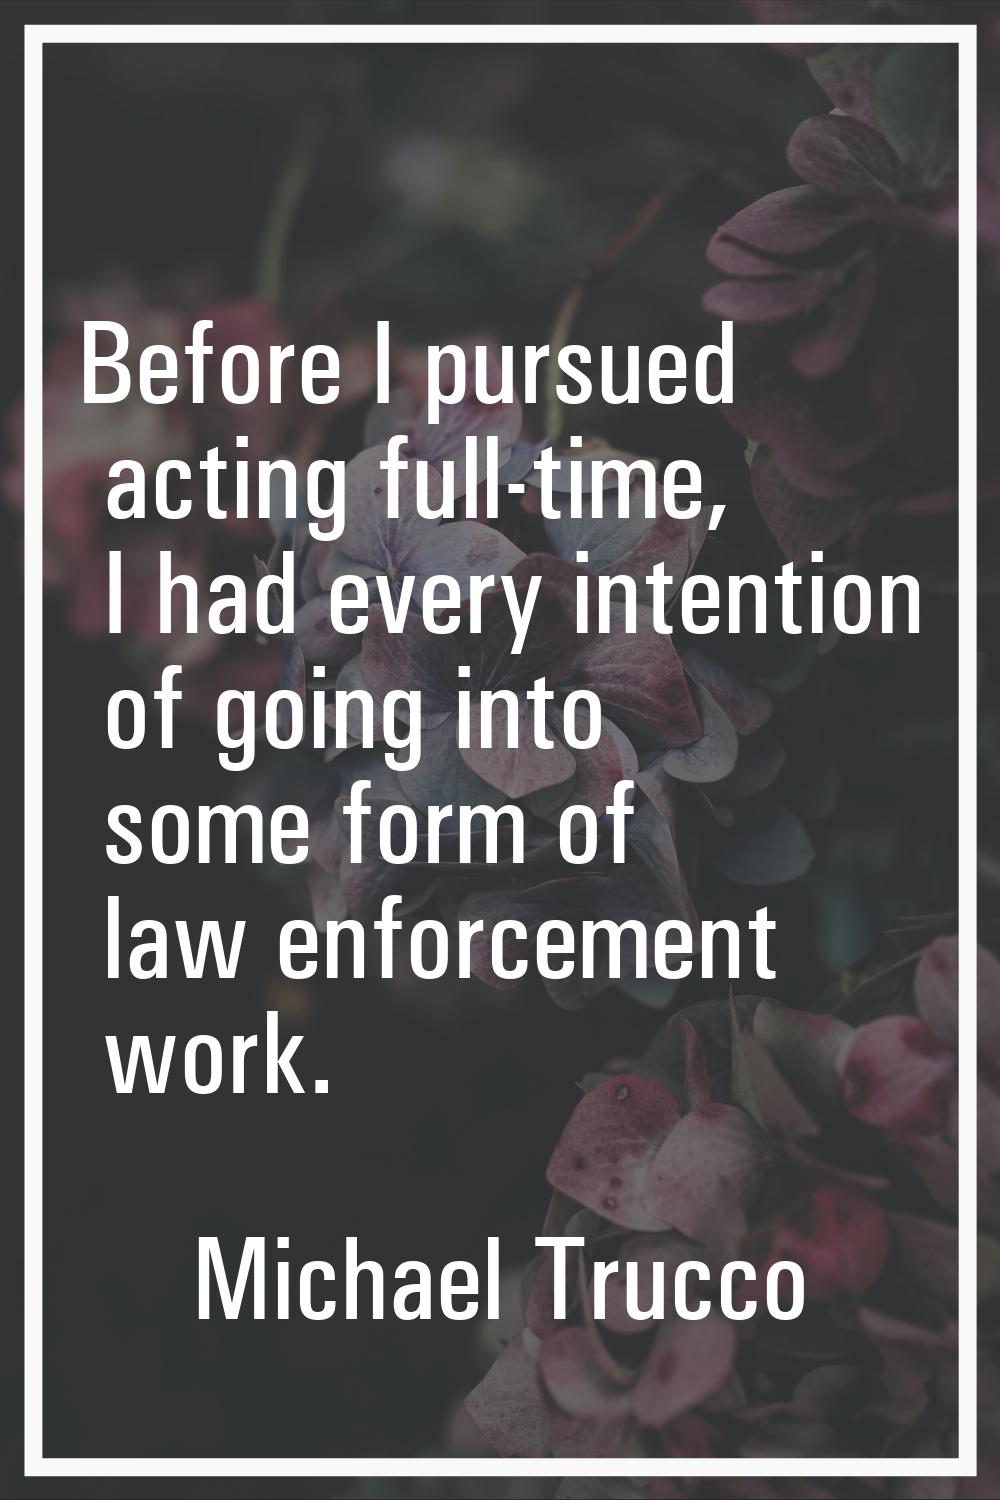 Before I pursued acting full-time, I had every intention of going into some form of law enforcement